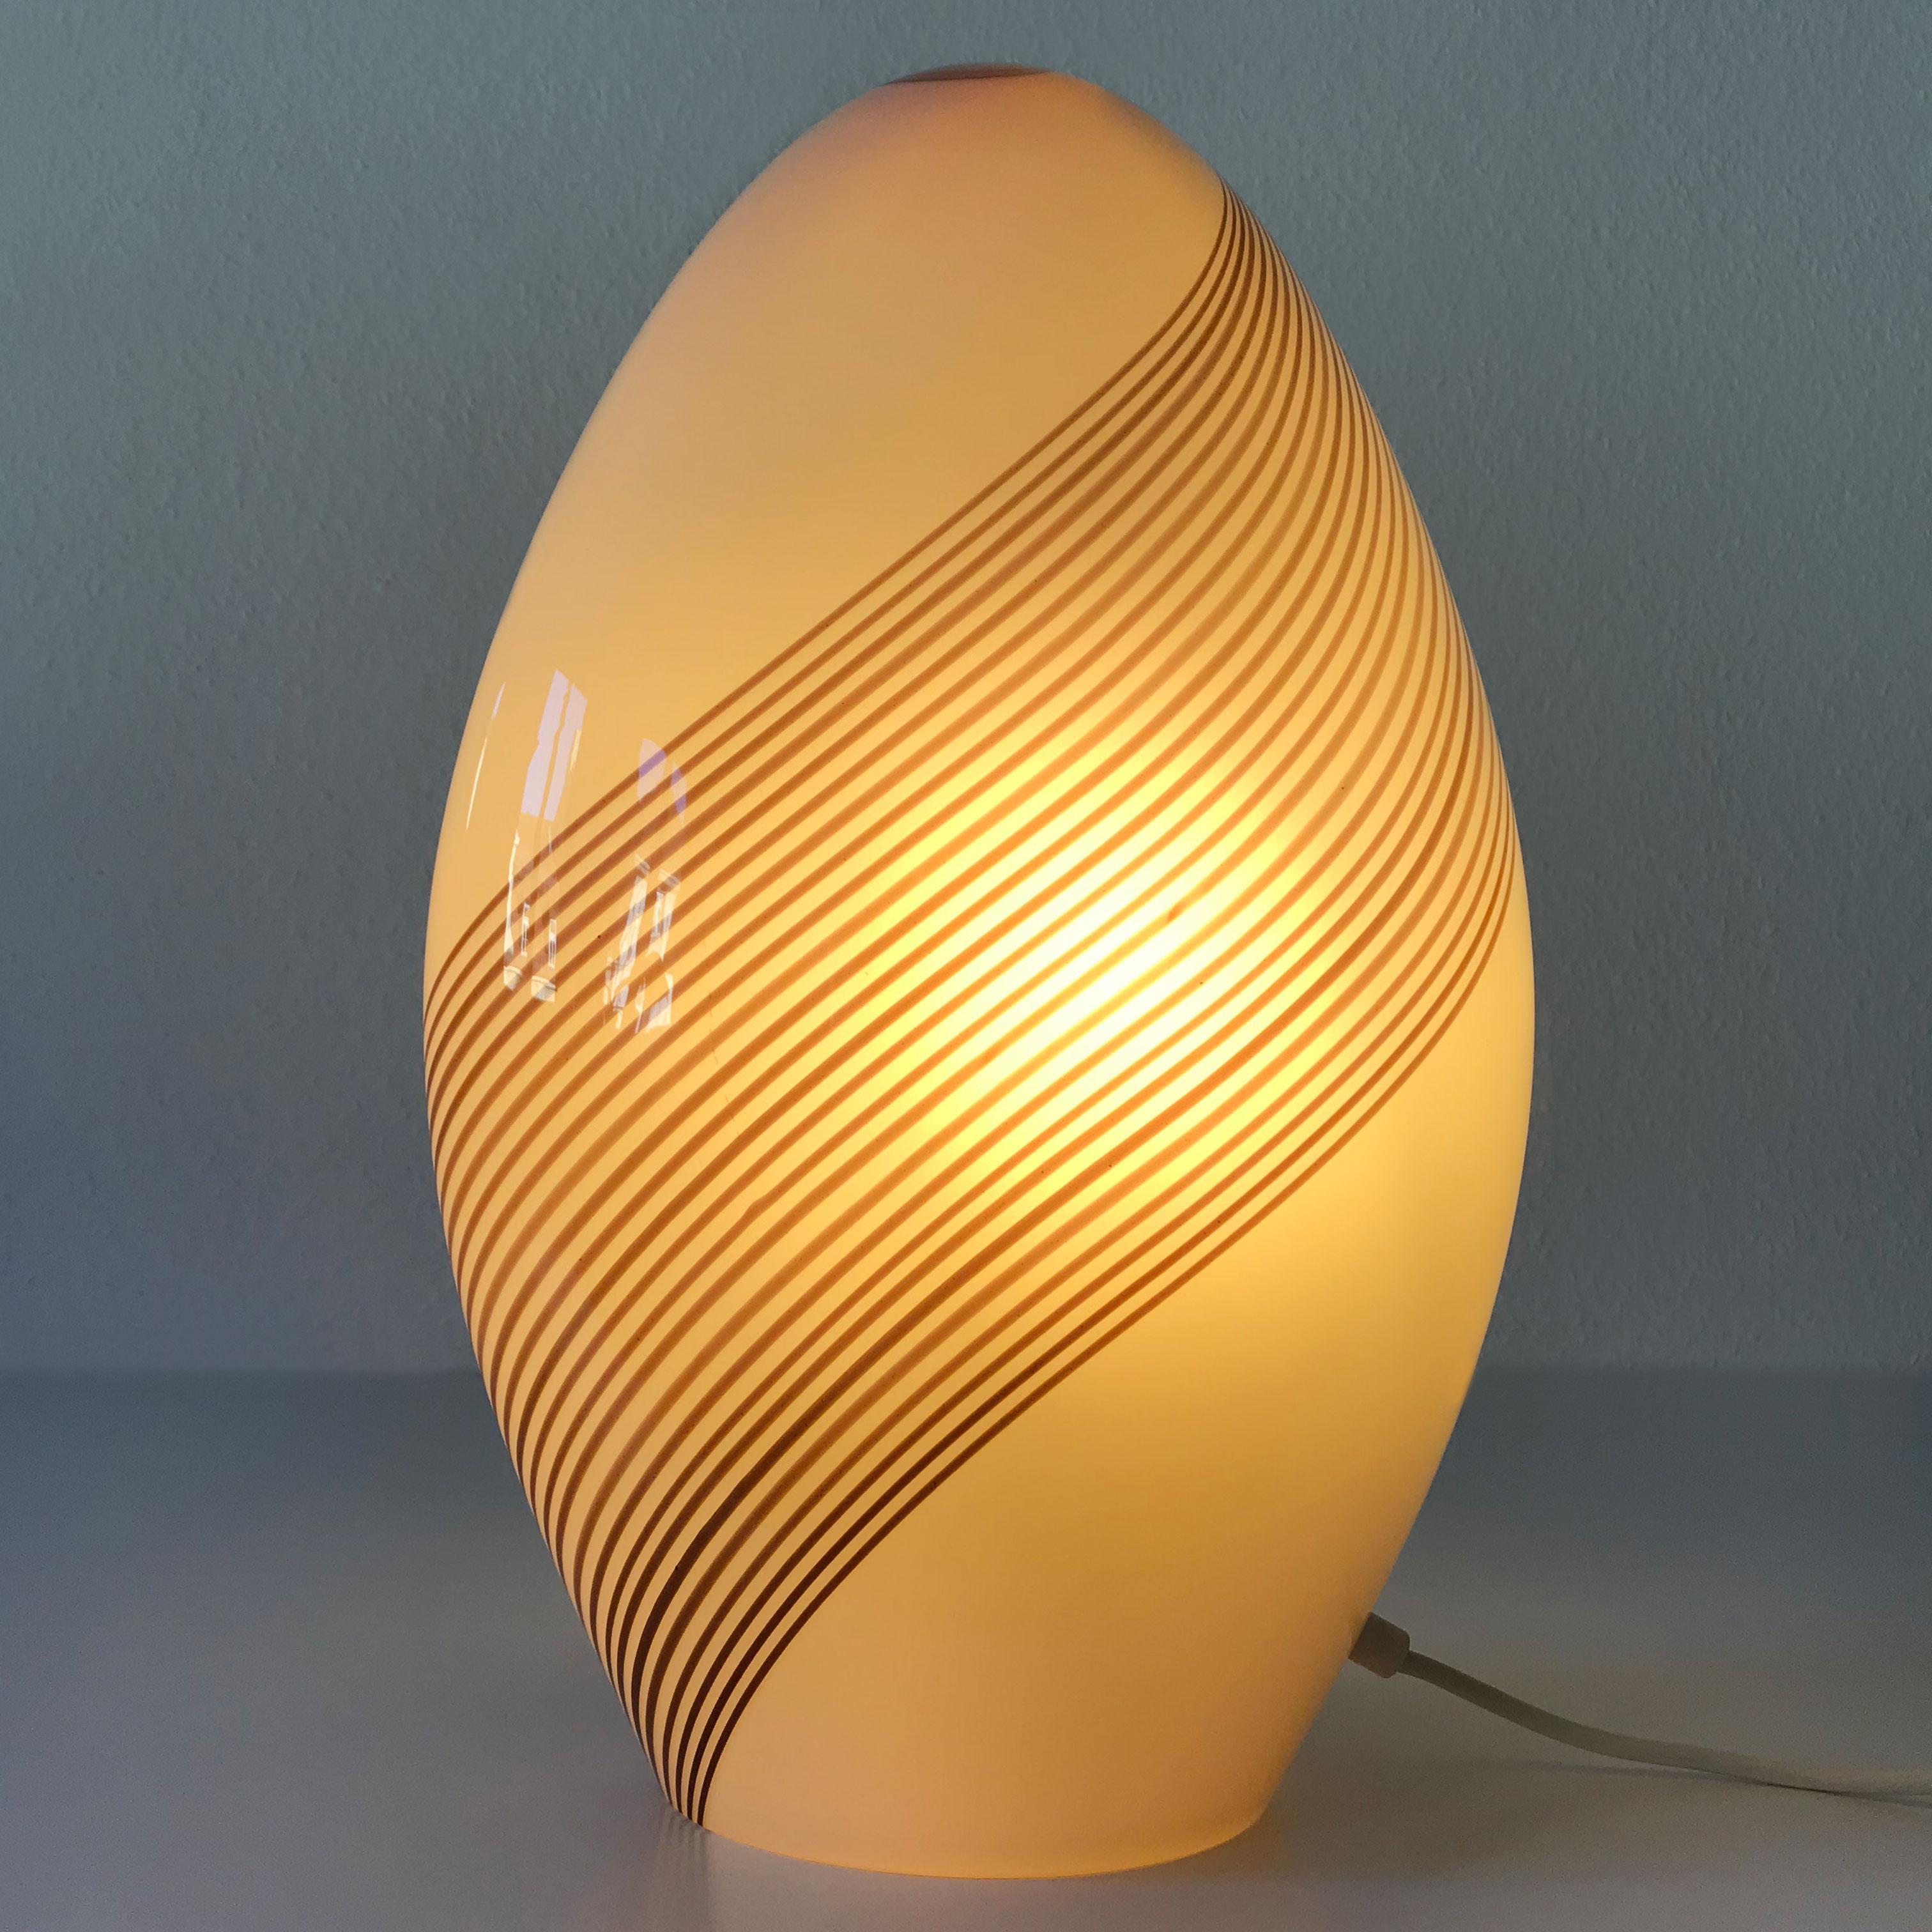 Extremely rare, large Mid-Century Modern Murano glass table lamp. Designed by Lino Tagliapietra for Effetre International Company, Italy, 1980s.

This table lamp is executed in thick Murano glass and needs an Edison screw fit E27 bulb. The lamp is